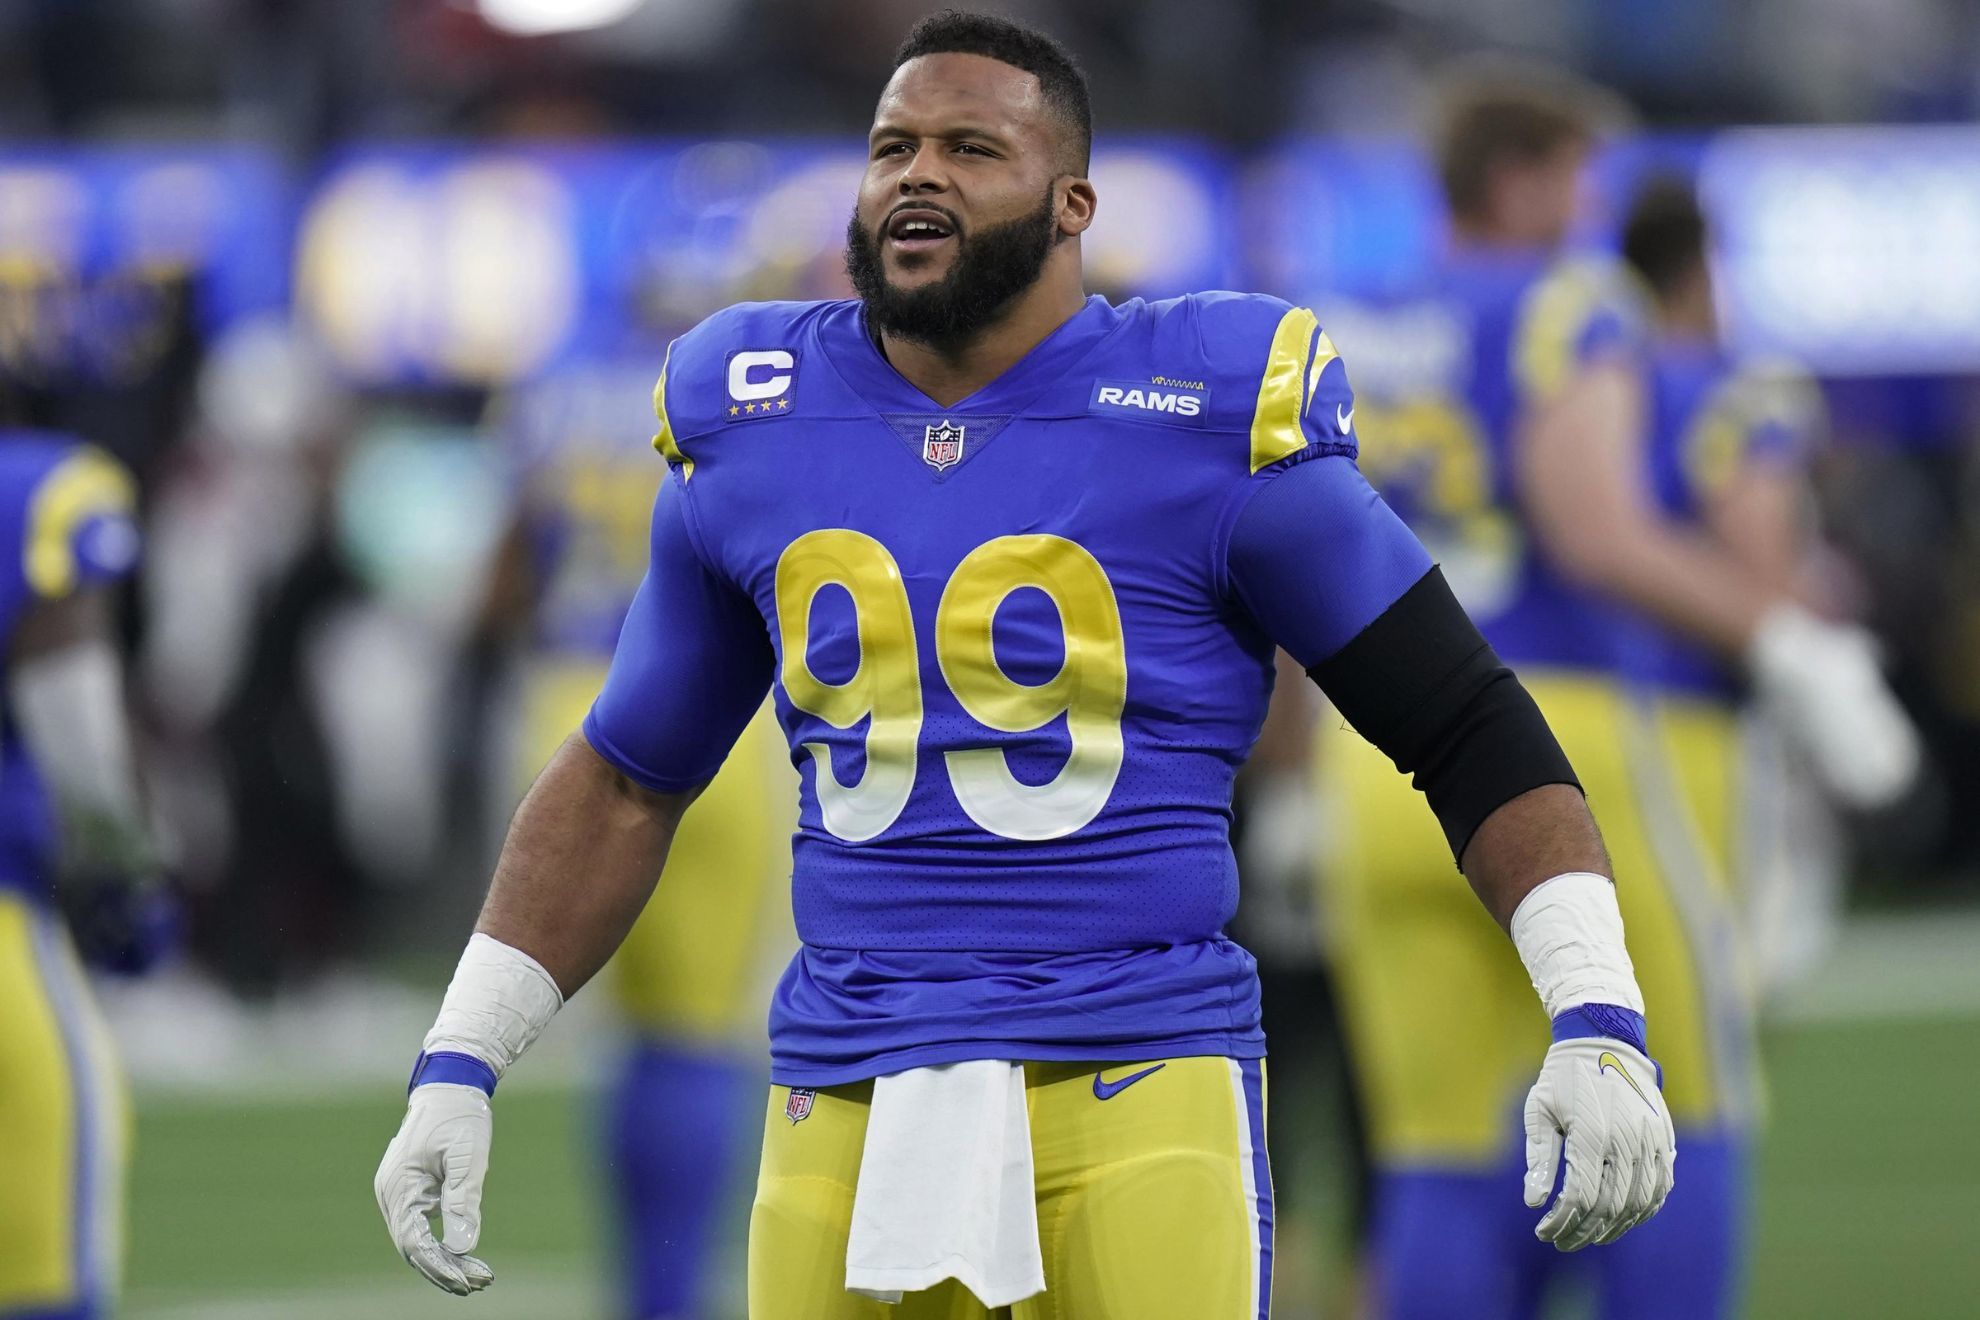 Aaron Donald will not play in Week 13 against the Seattle Seahawks due to injury.